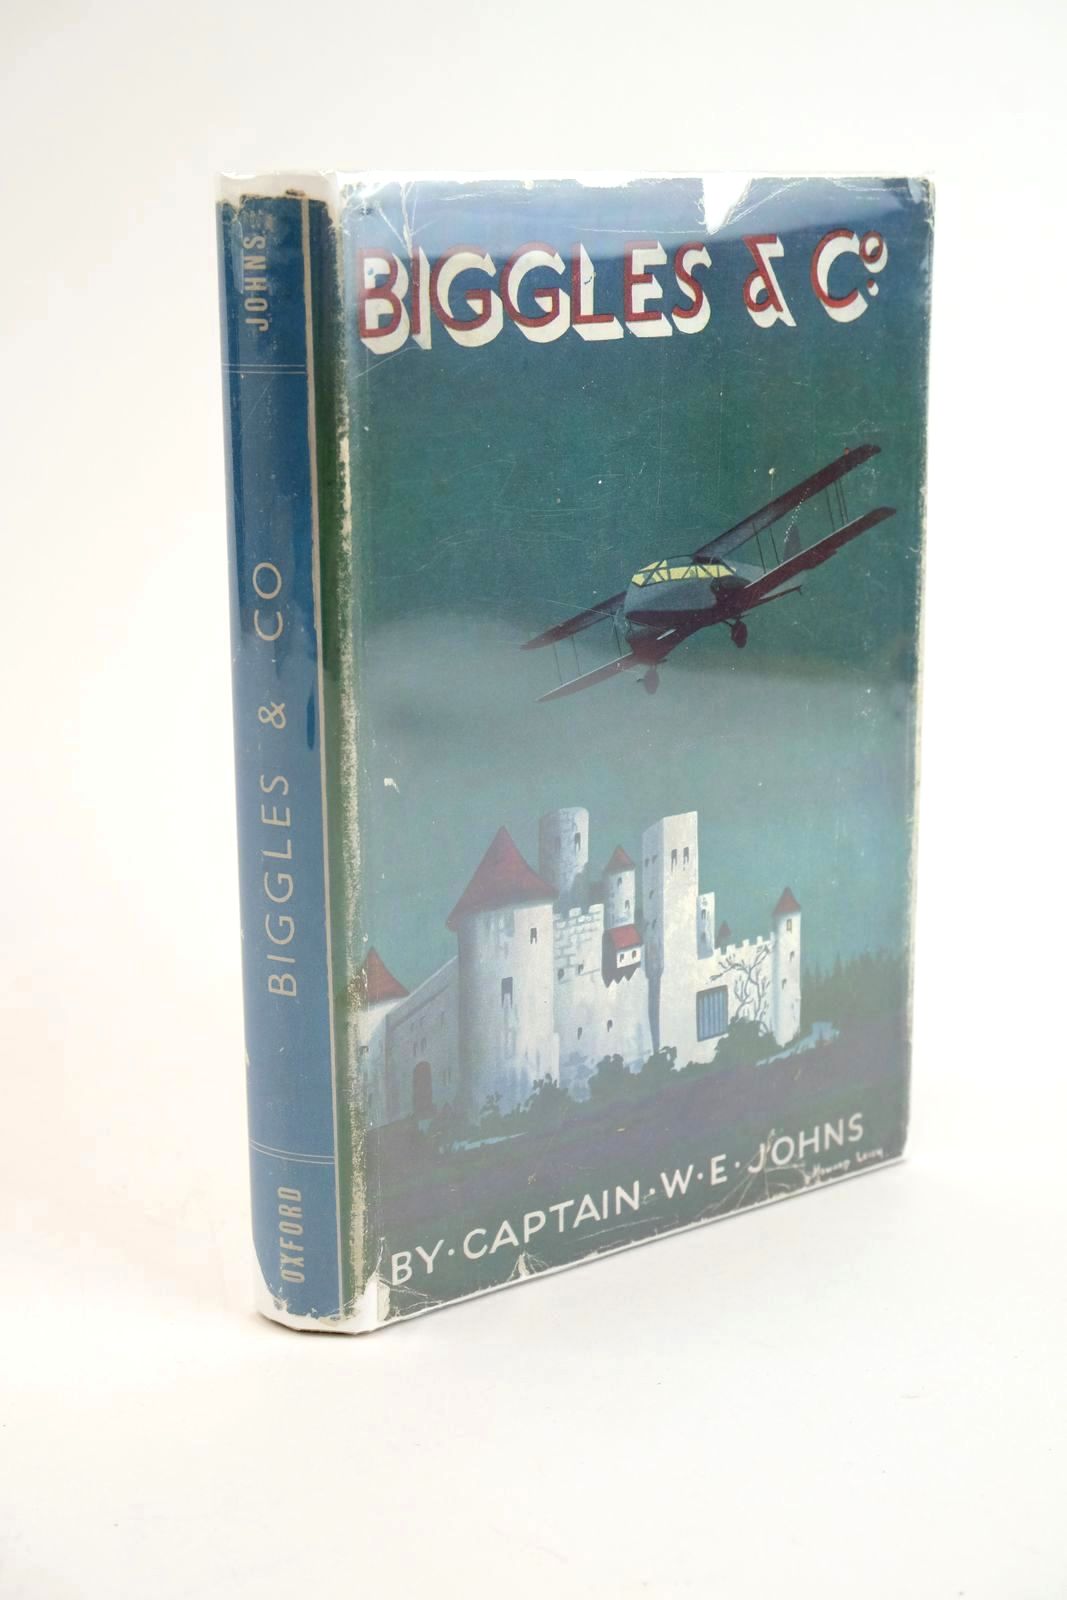 Photo of BIGGLES & CO.- Stock Number: 1323436